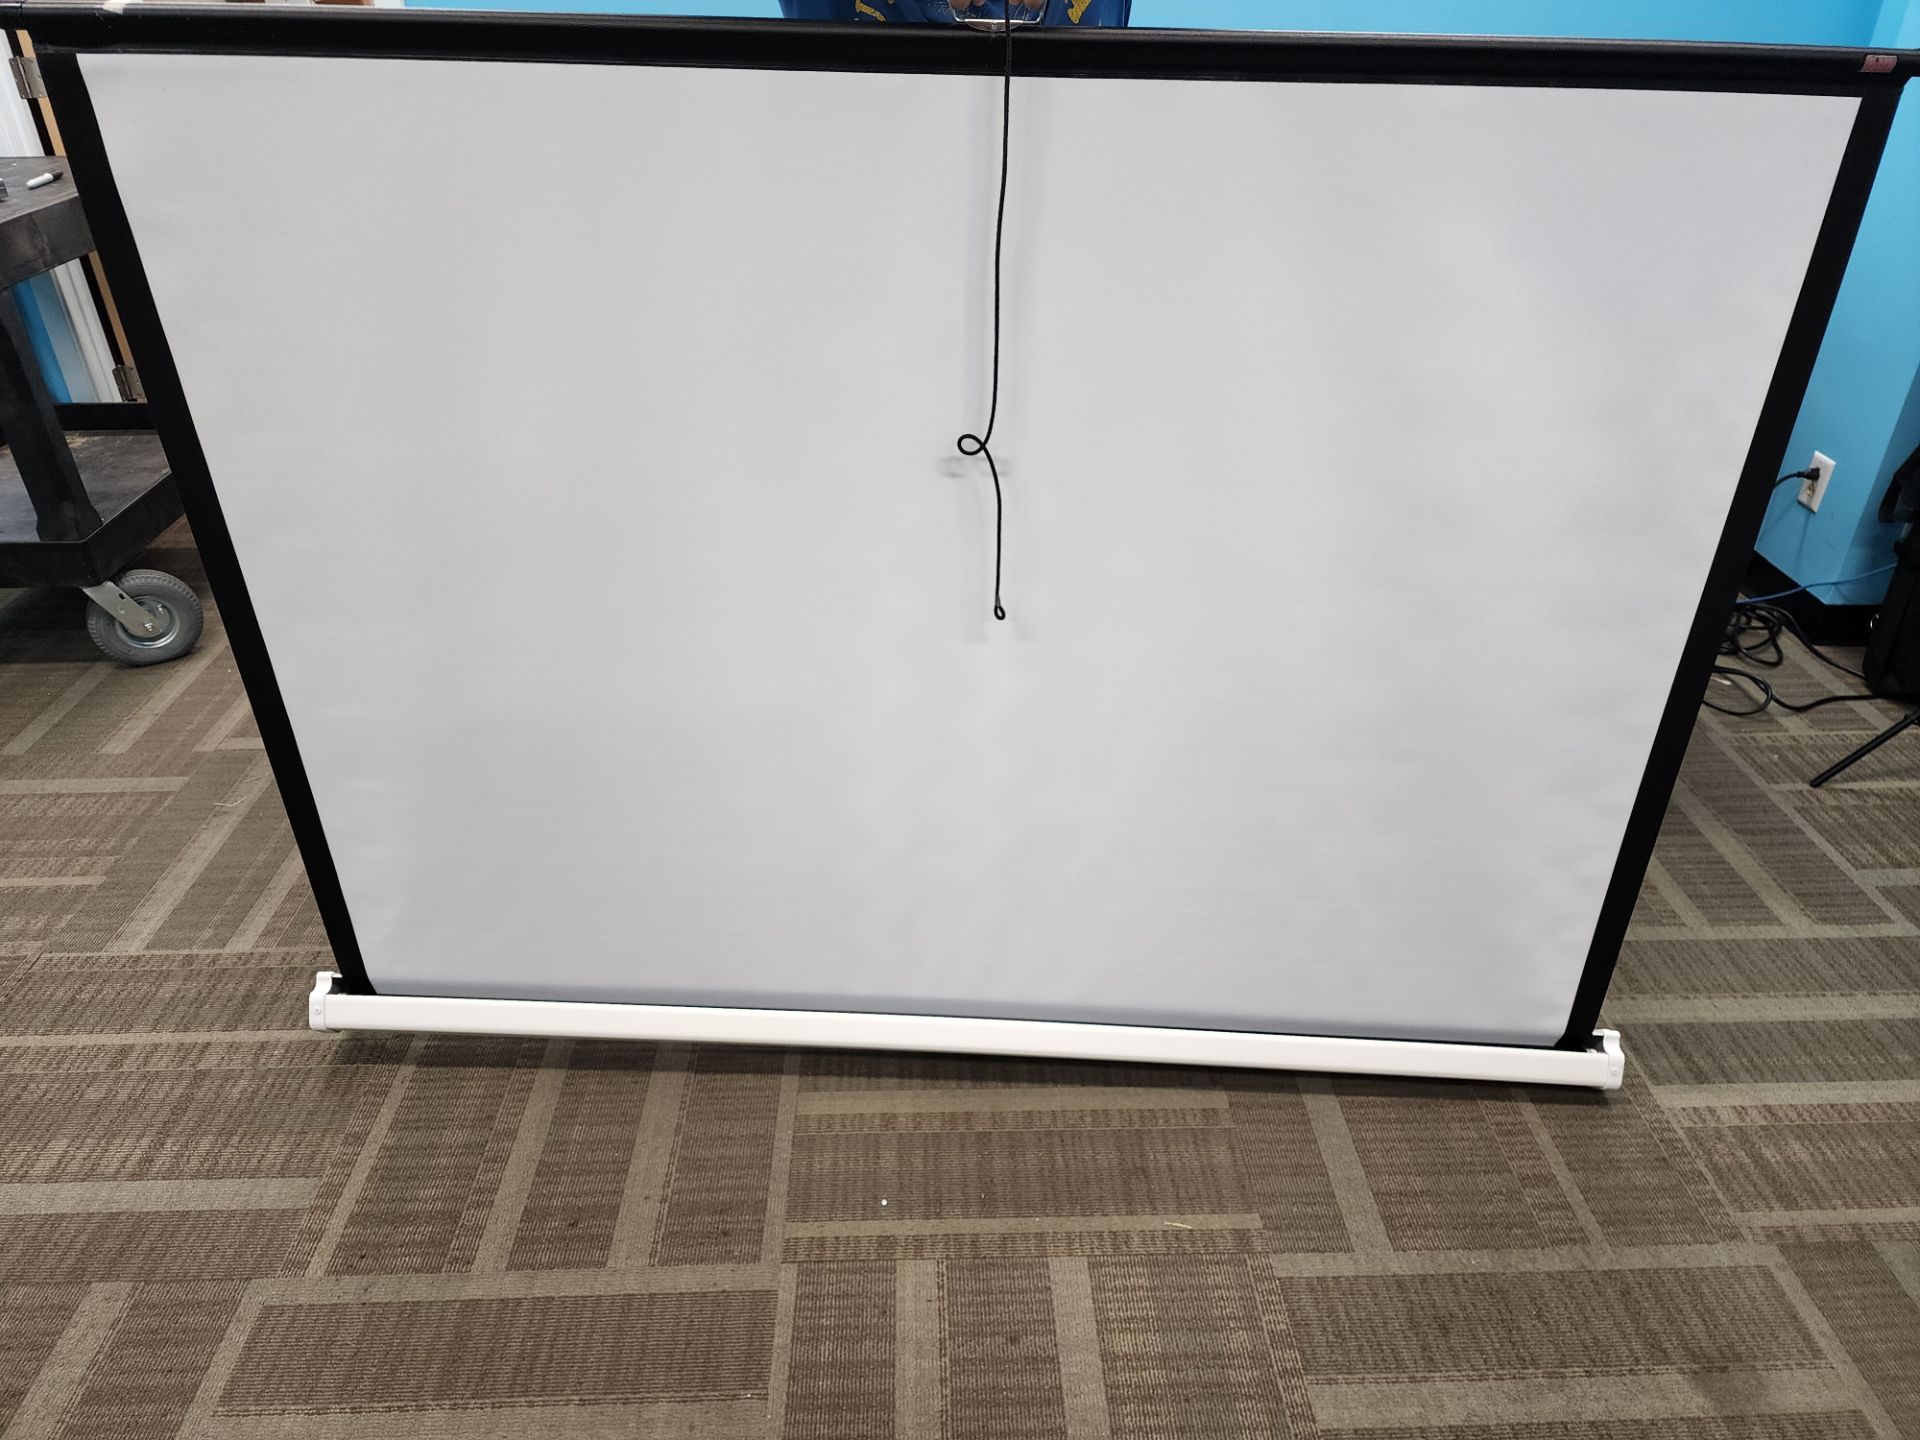 Draper Luma Manual Projector Screen, Max Image Width 96" Wide, Can be wall or ceiling mounted - Image 2 of 3